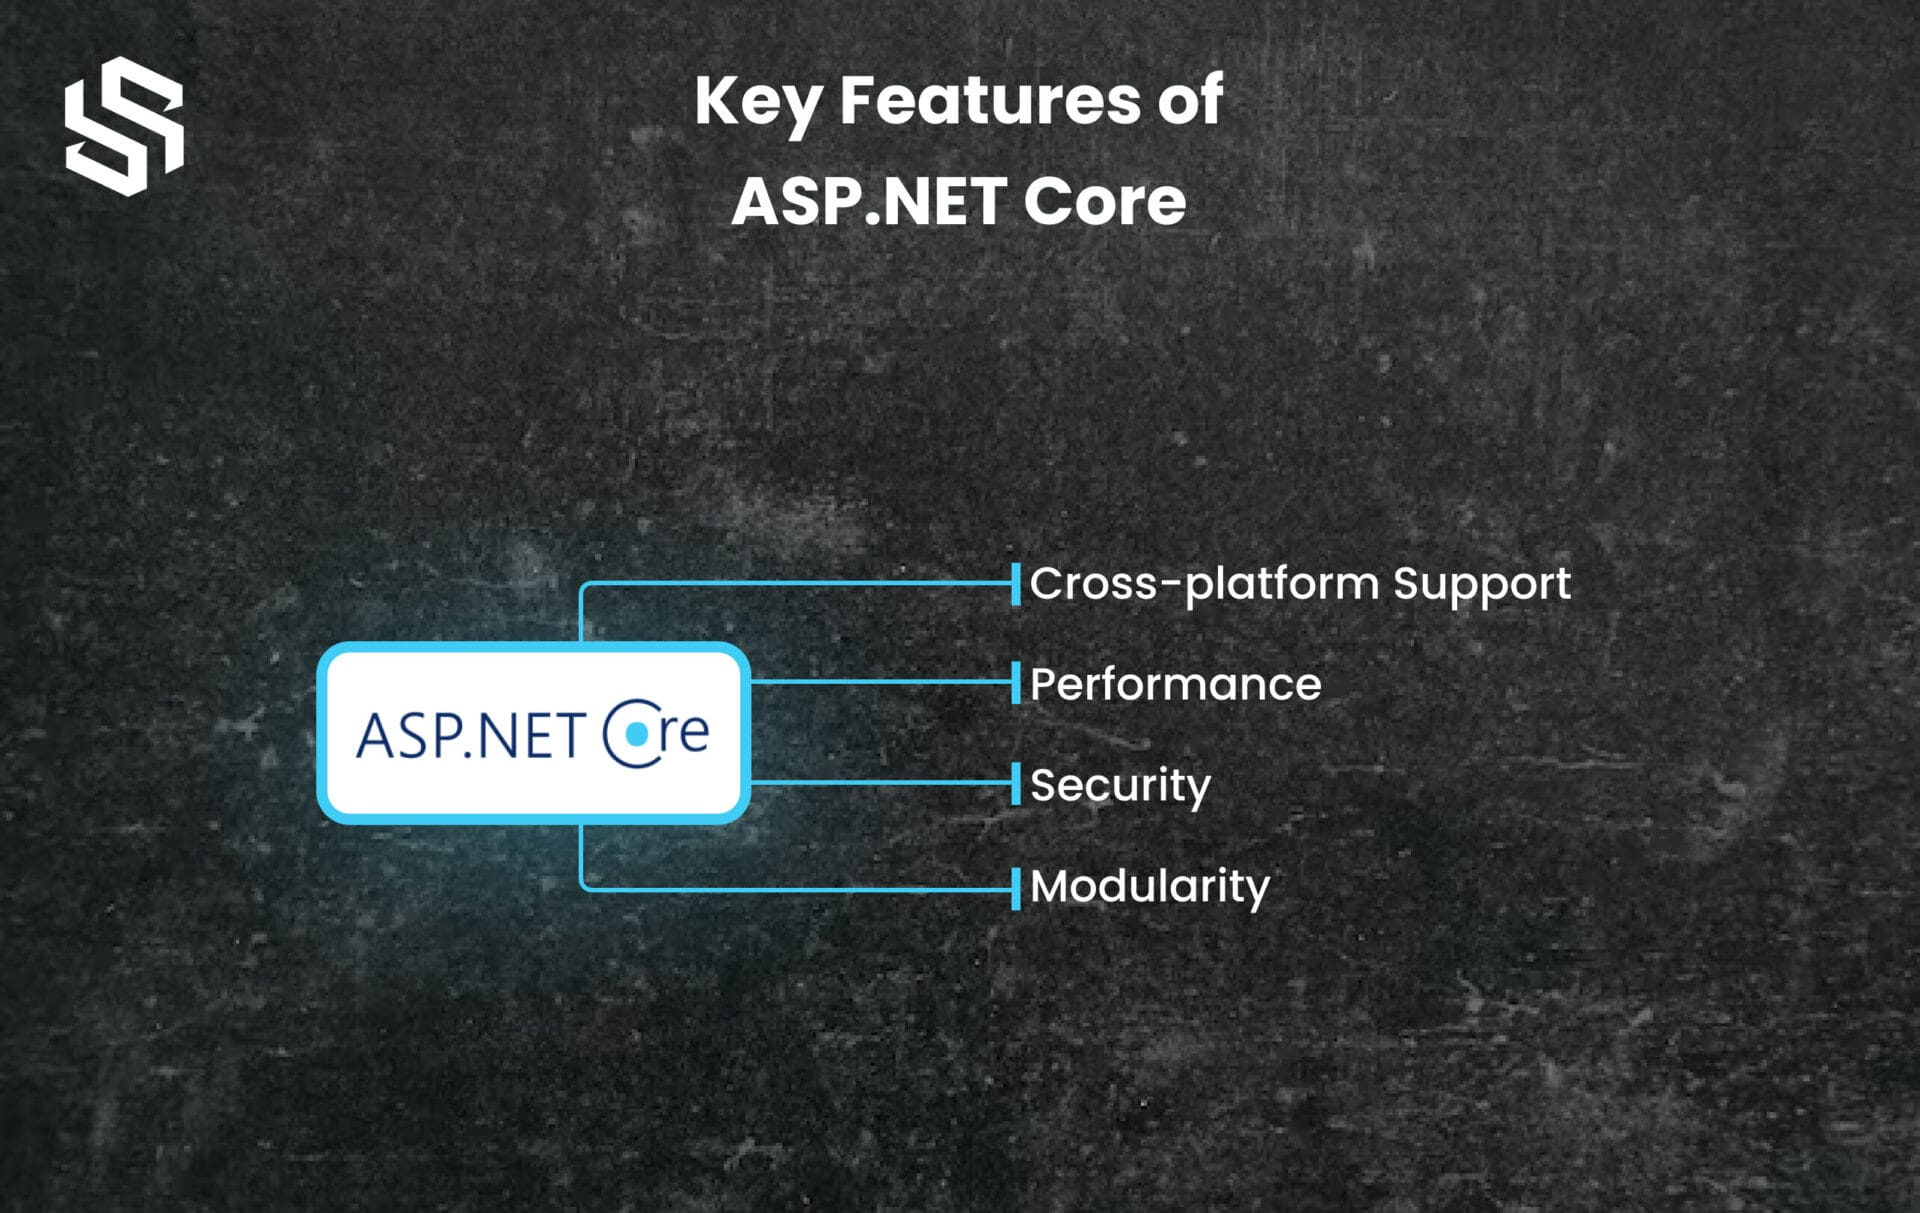 Key Features of ASP.NET Core